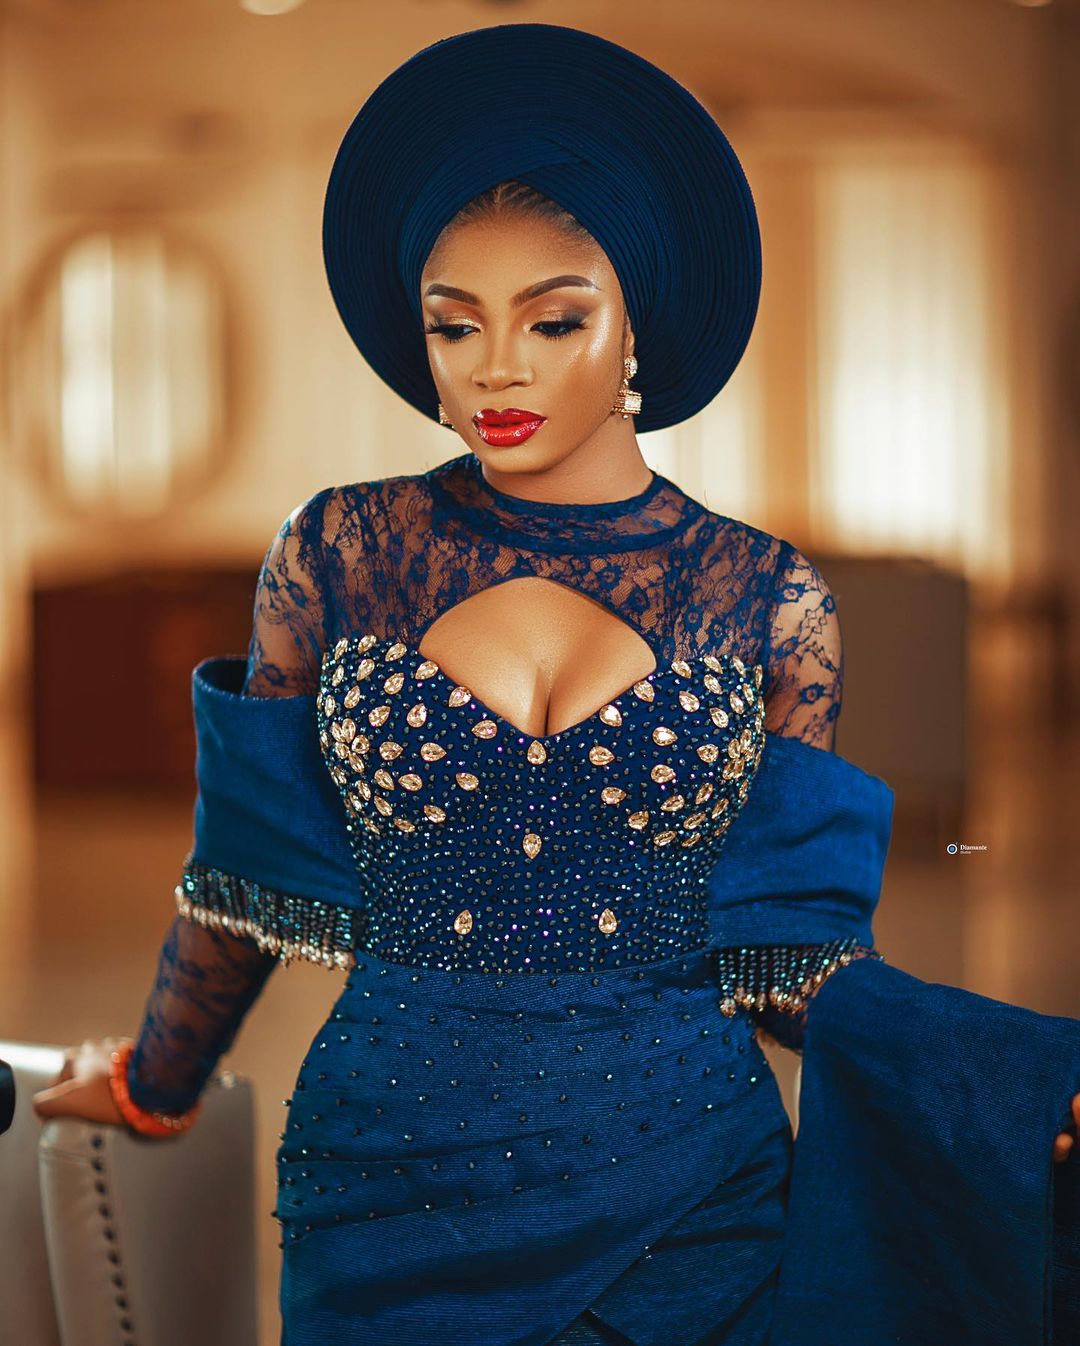 This Yoruba Beauty Look is a Fine Mix Of Charm & Style